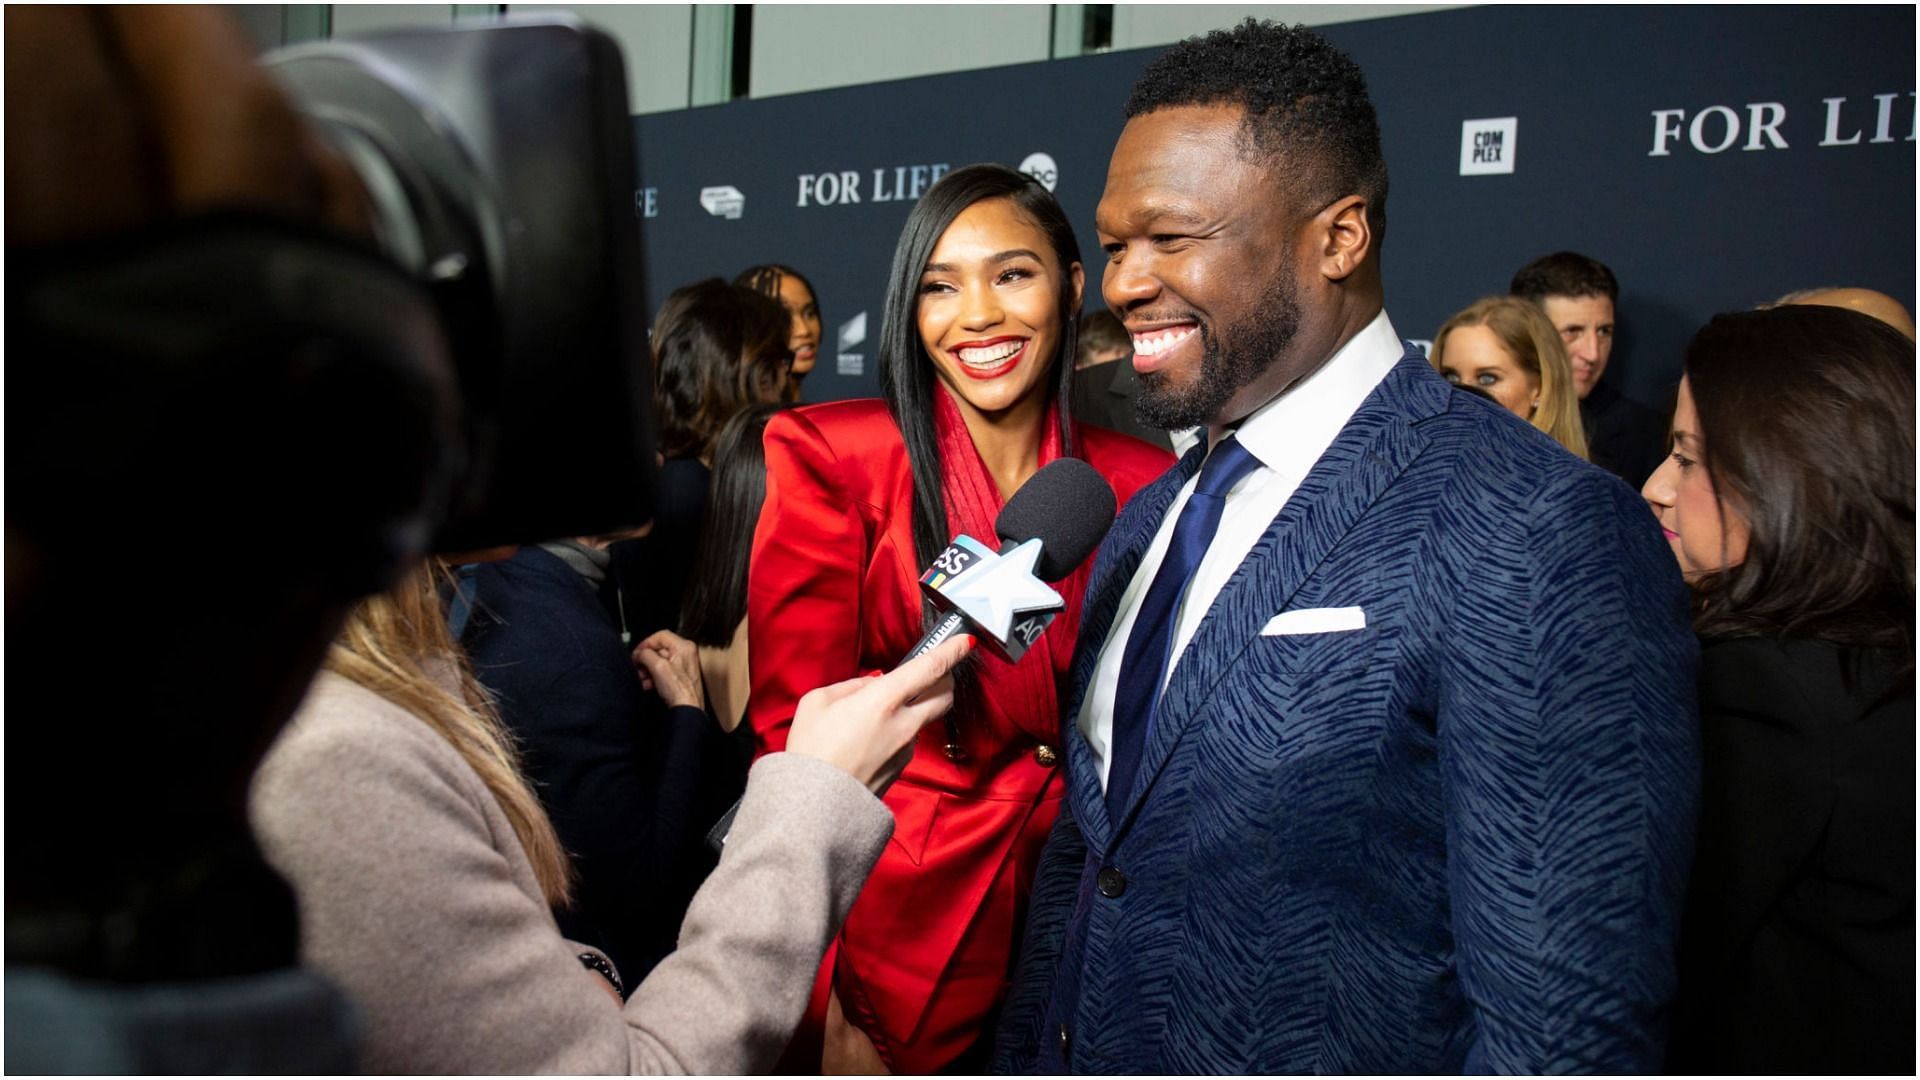 50 Cent and Cuban Link at the New York premiere of For Life (Image by Arturo Holmes via Getty Images)